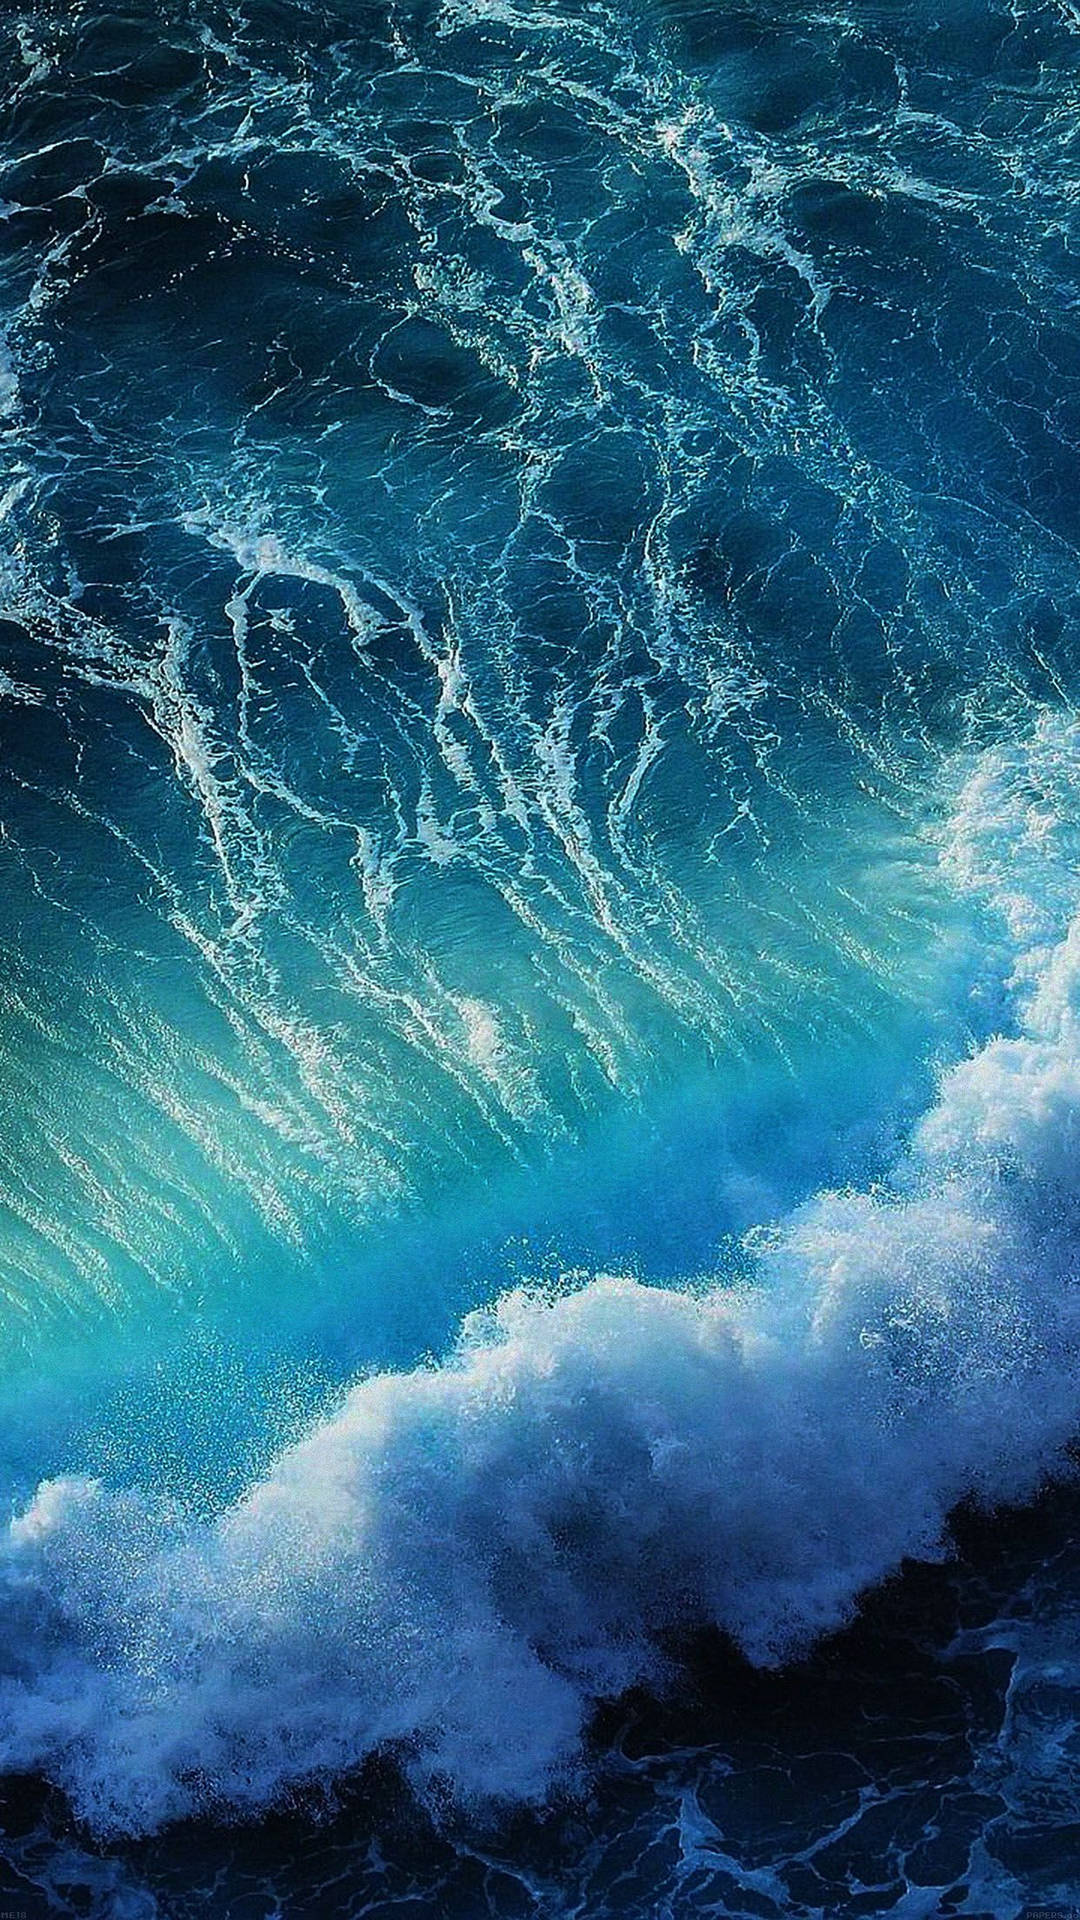 Enjoy The View Of The Ocean Waves At Anytime With An Iphone Background